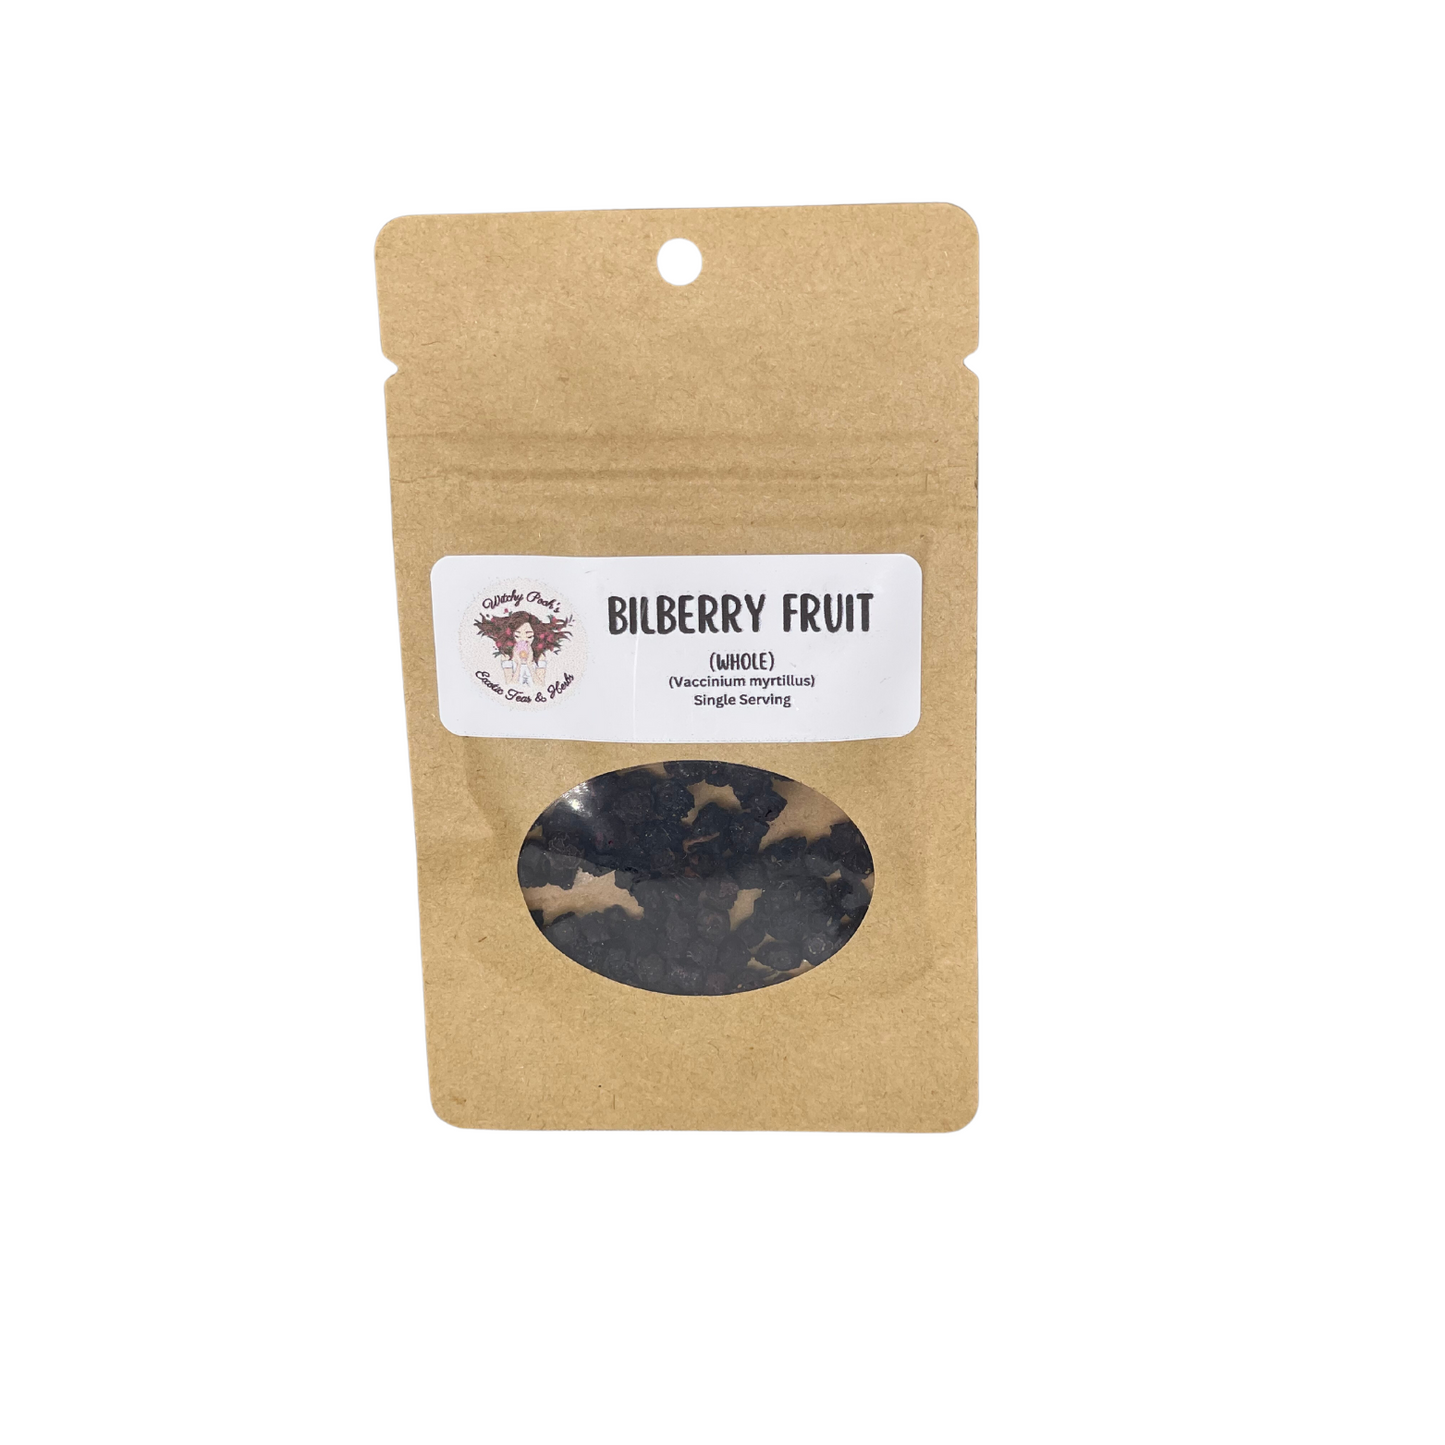 Witchy Pooh's Bilberry Fruit Whole Soft and Chewy Berry Snack, Exotic Berries Great for Trail Mix